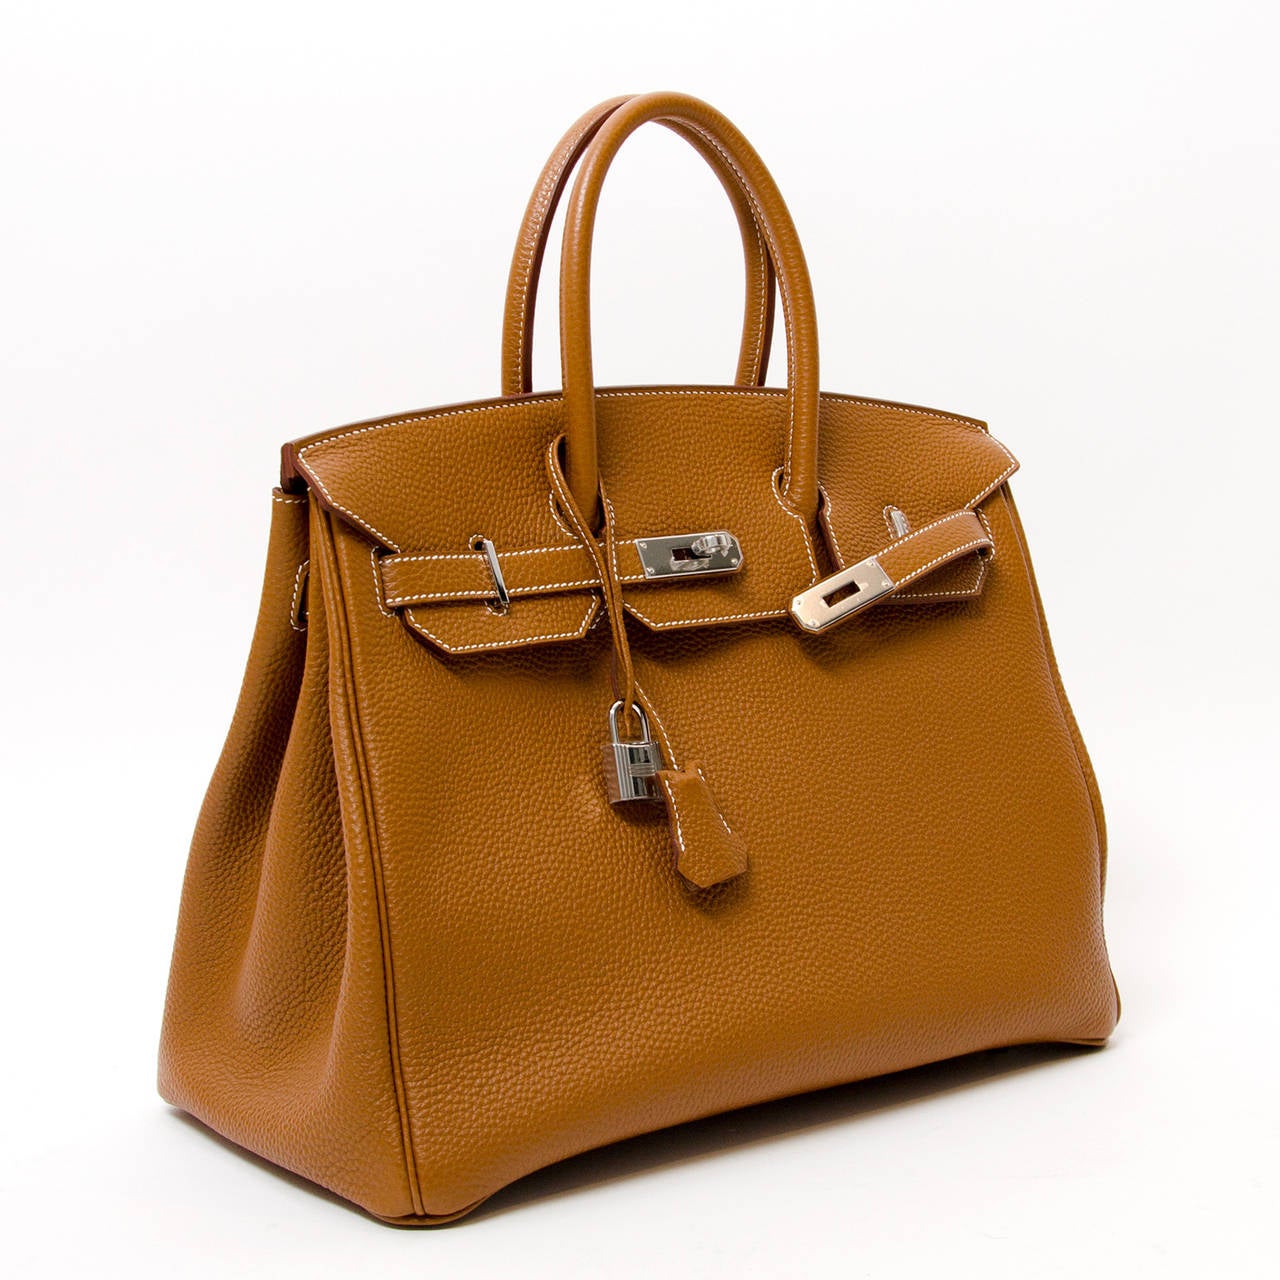 Brand New Hermes Birkin 35 Gold PHW Togo Blindstamp R (2014) 
Comes with original invoice, dust bag , box and raincoat.